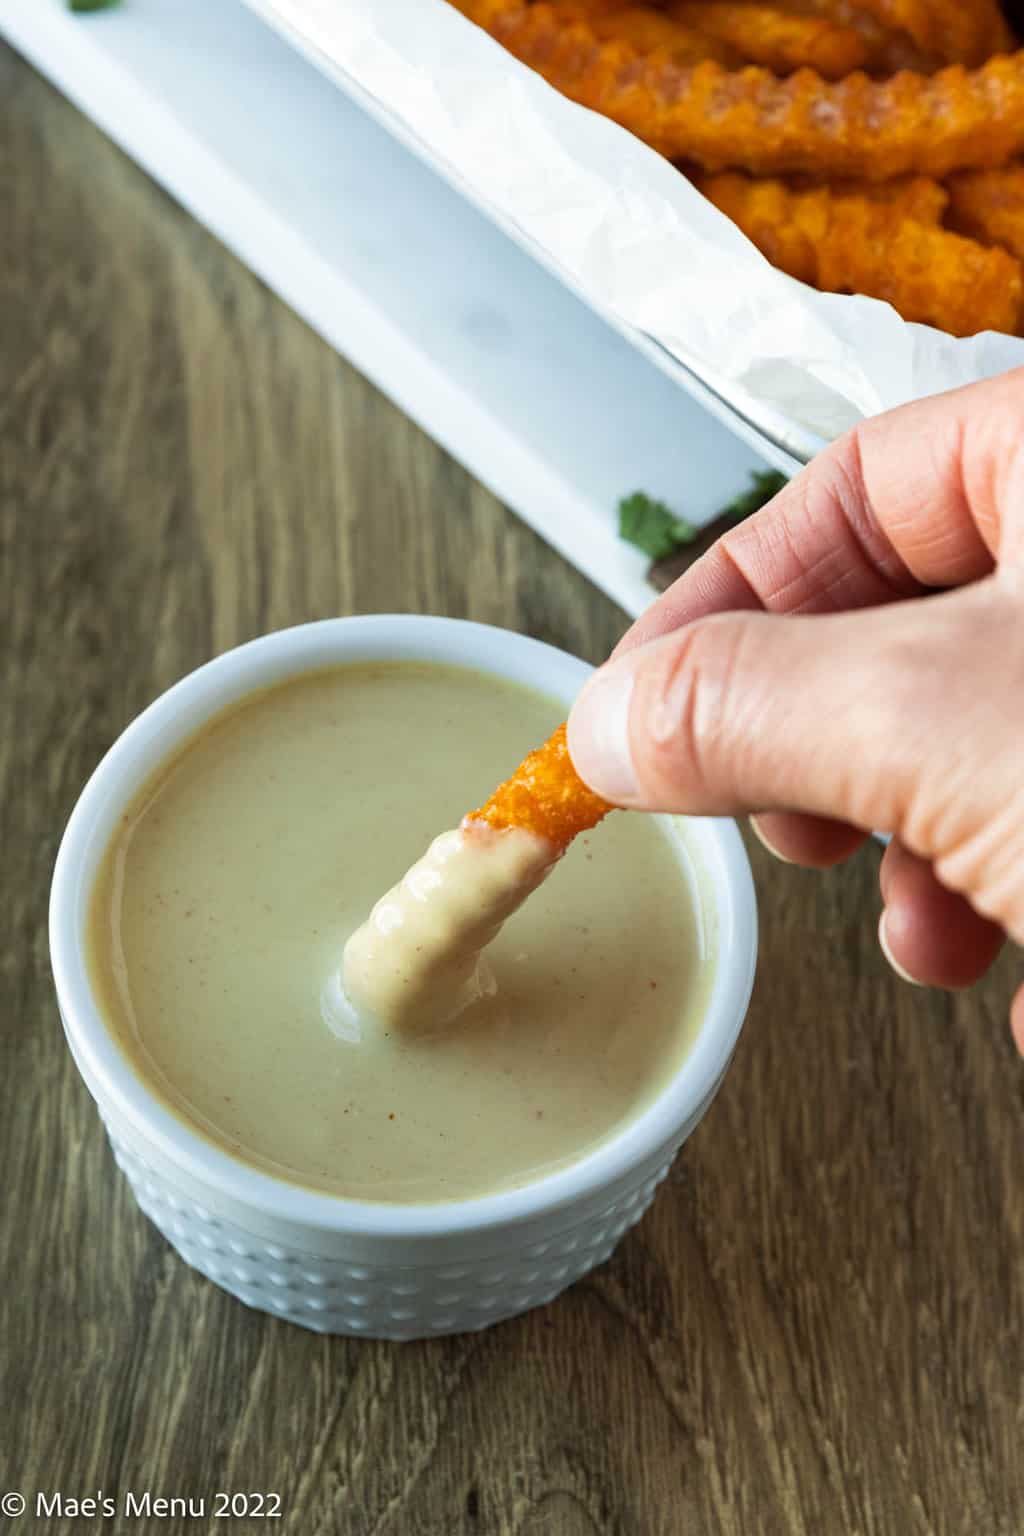 A hand dipping a sweet potato fry into a small cup of honey mustard dip.